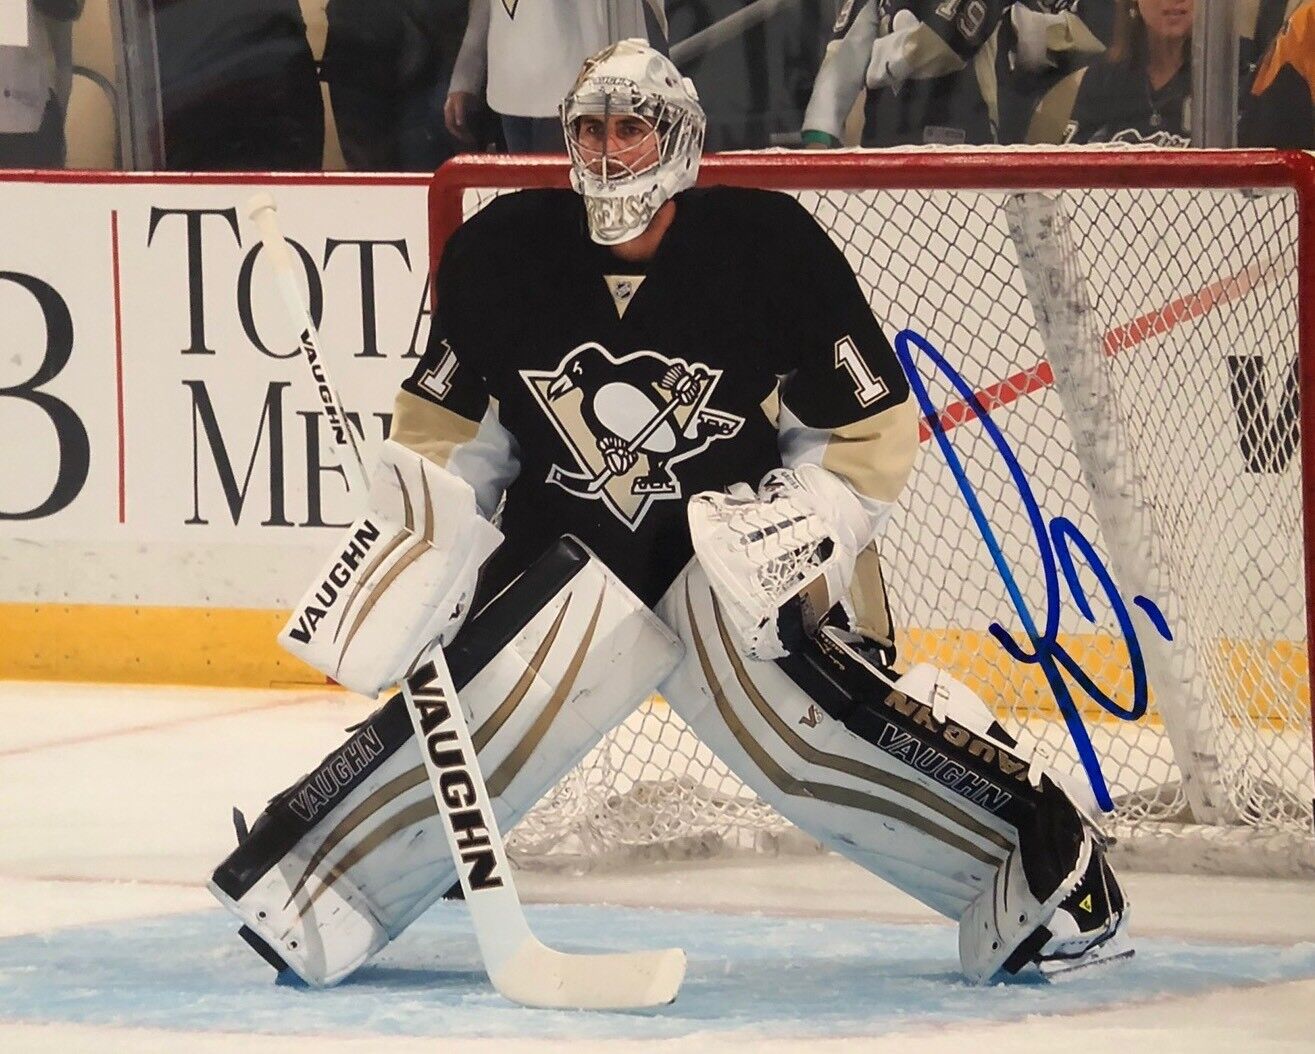 Thomas Greiss Signed 8x10 photo PITTSBURGH PENGUINS AUTOGRAPH PENS